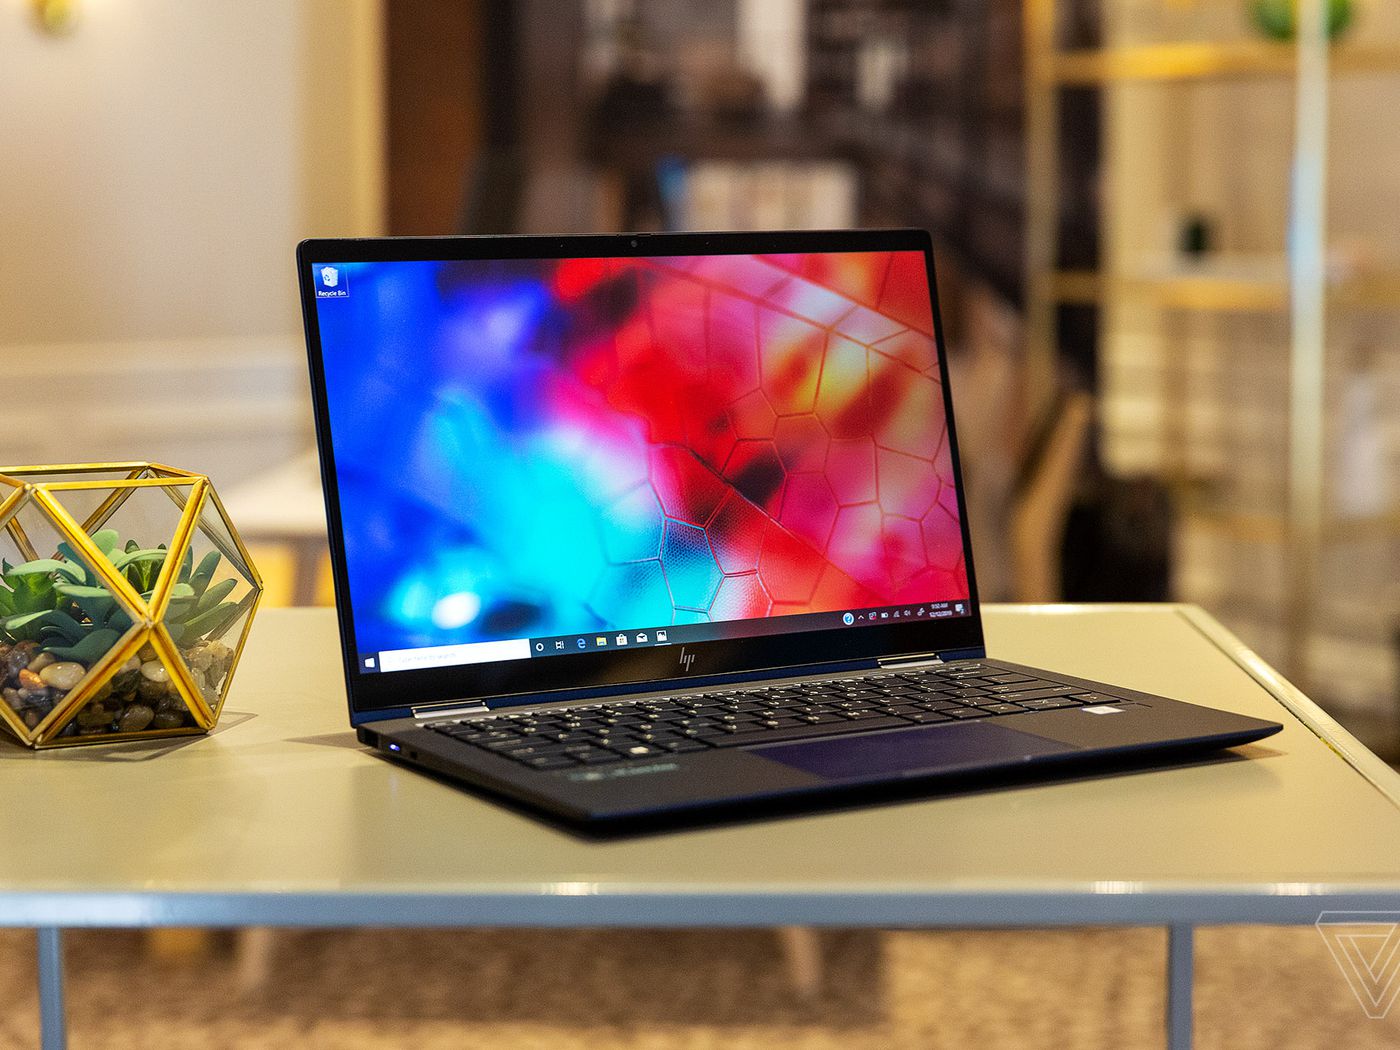 HP dispatches two new Dragonfly PCs with 5G and Tile following built in